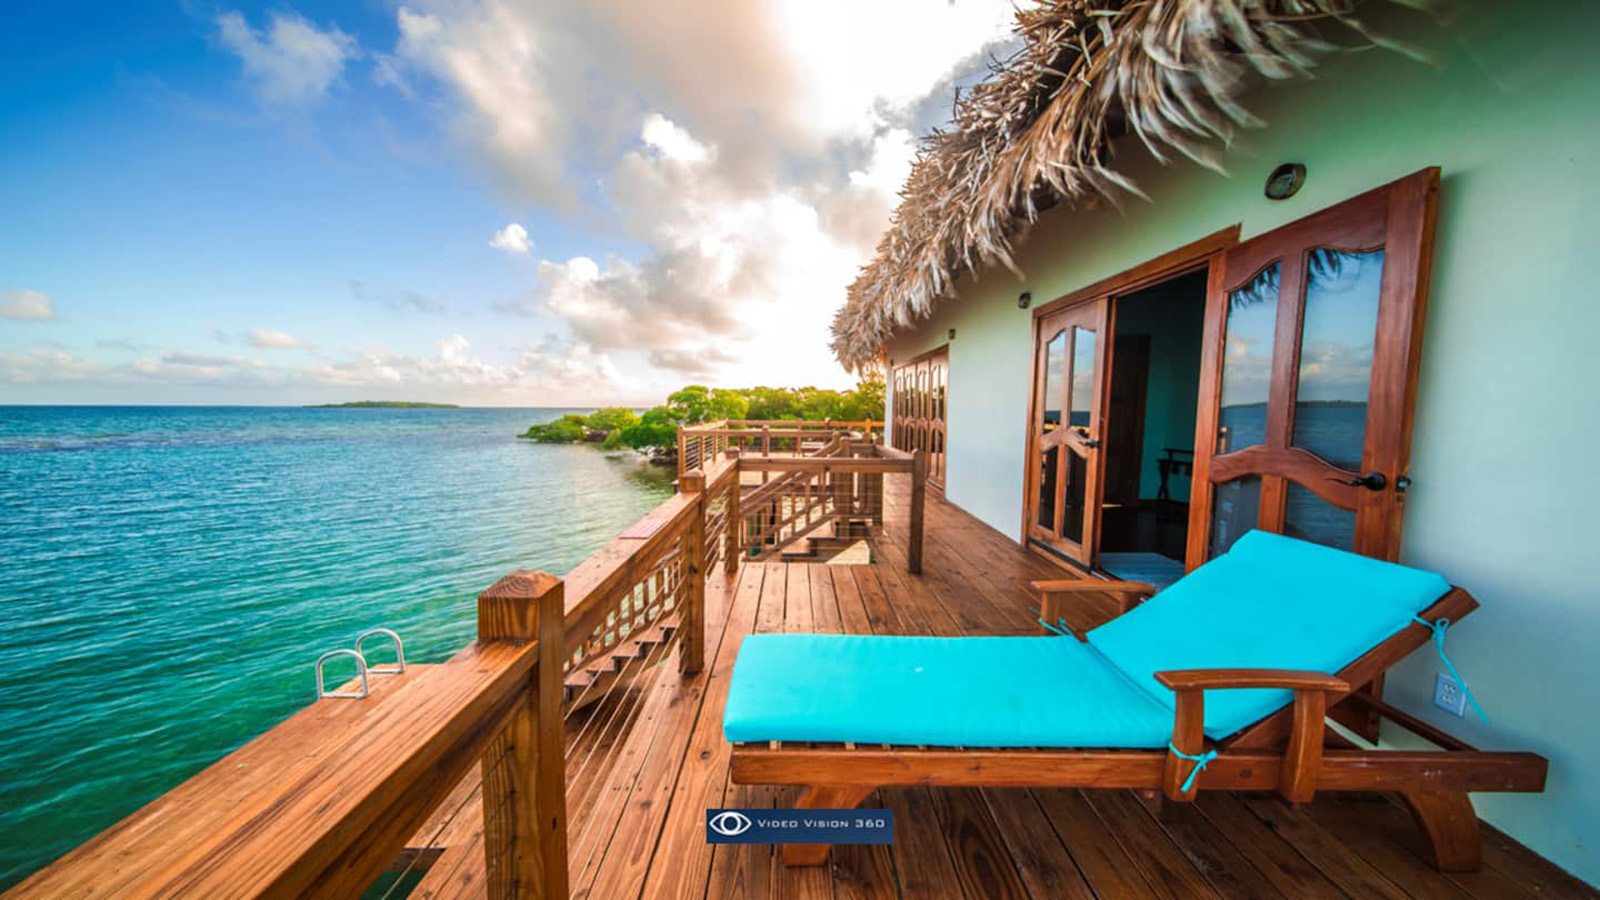 Views from the overwater bungalow on Little Peter Oasis